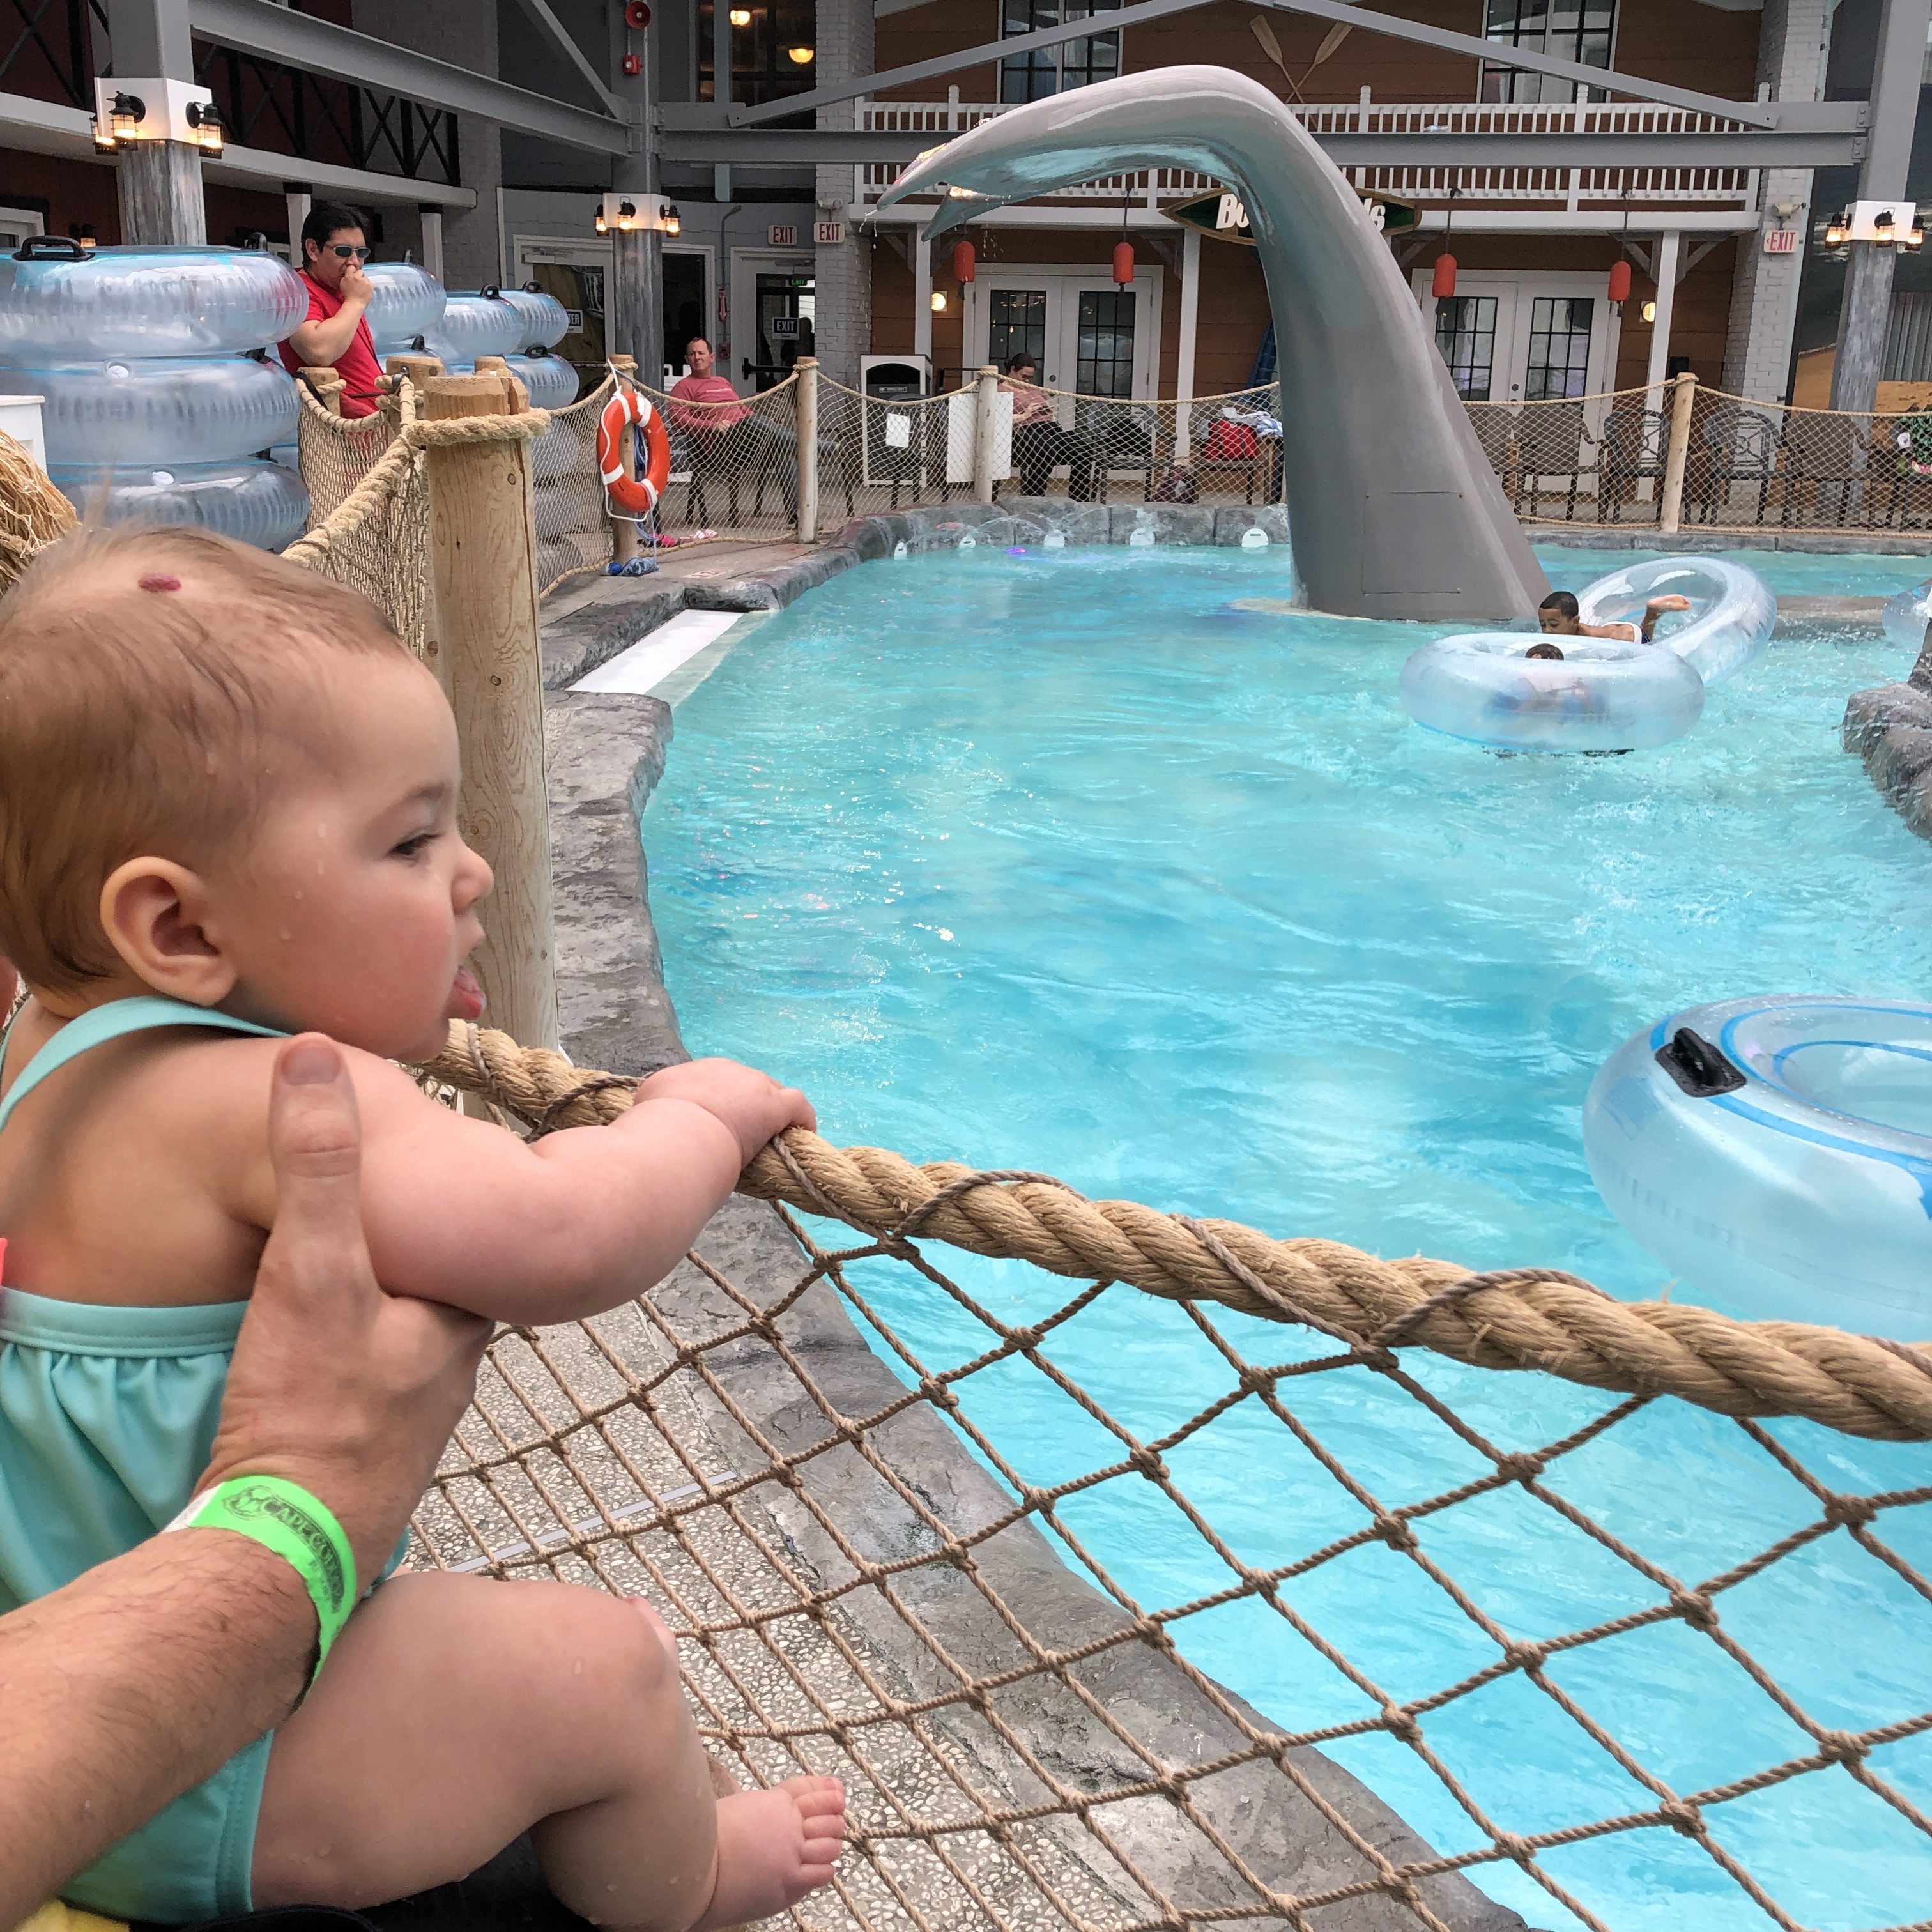 Blog Archive Road Trippin': A Weekend Family Getaway at the Cape Codder  Resort & Spa in Hyannis - Healthy Chicks